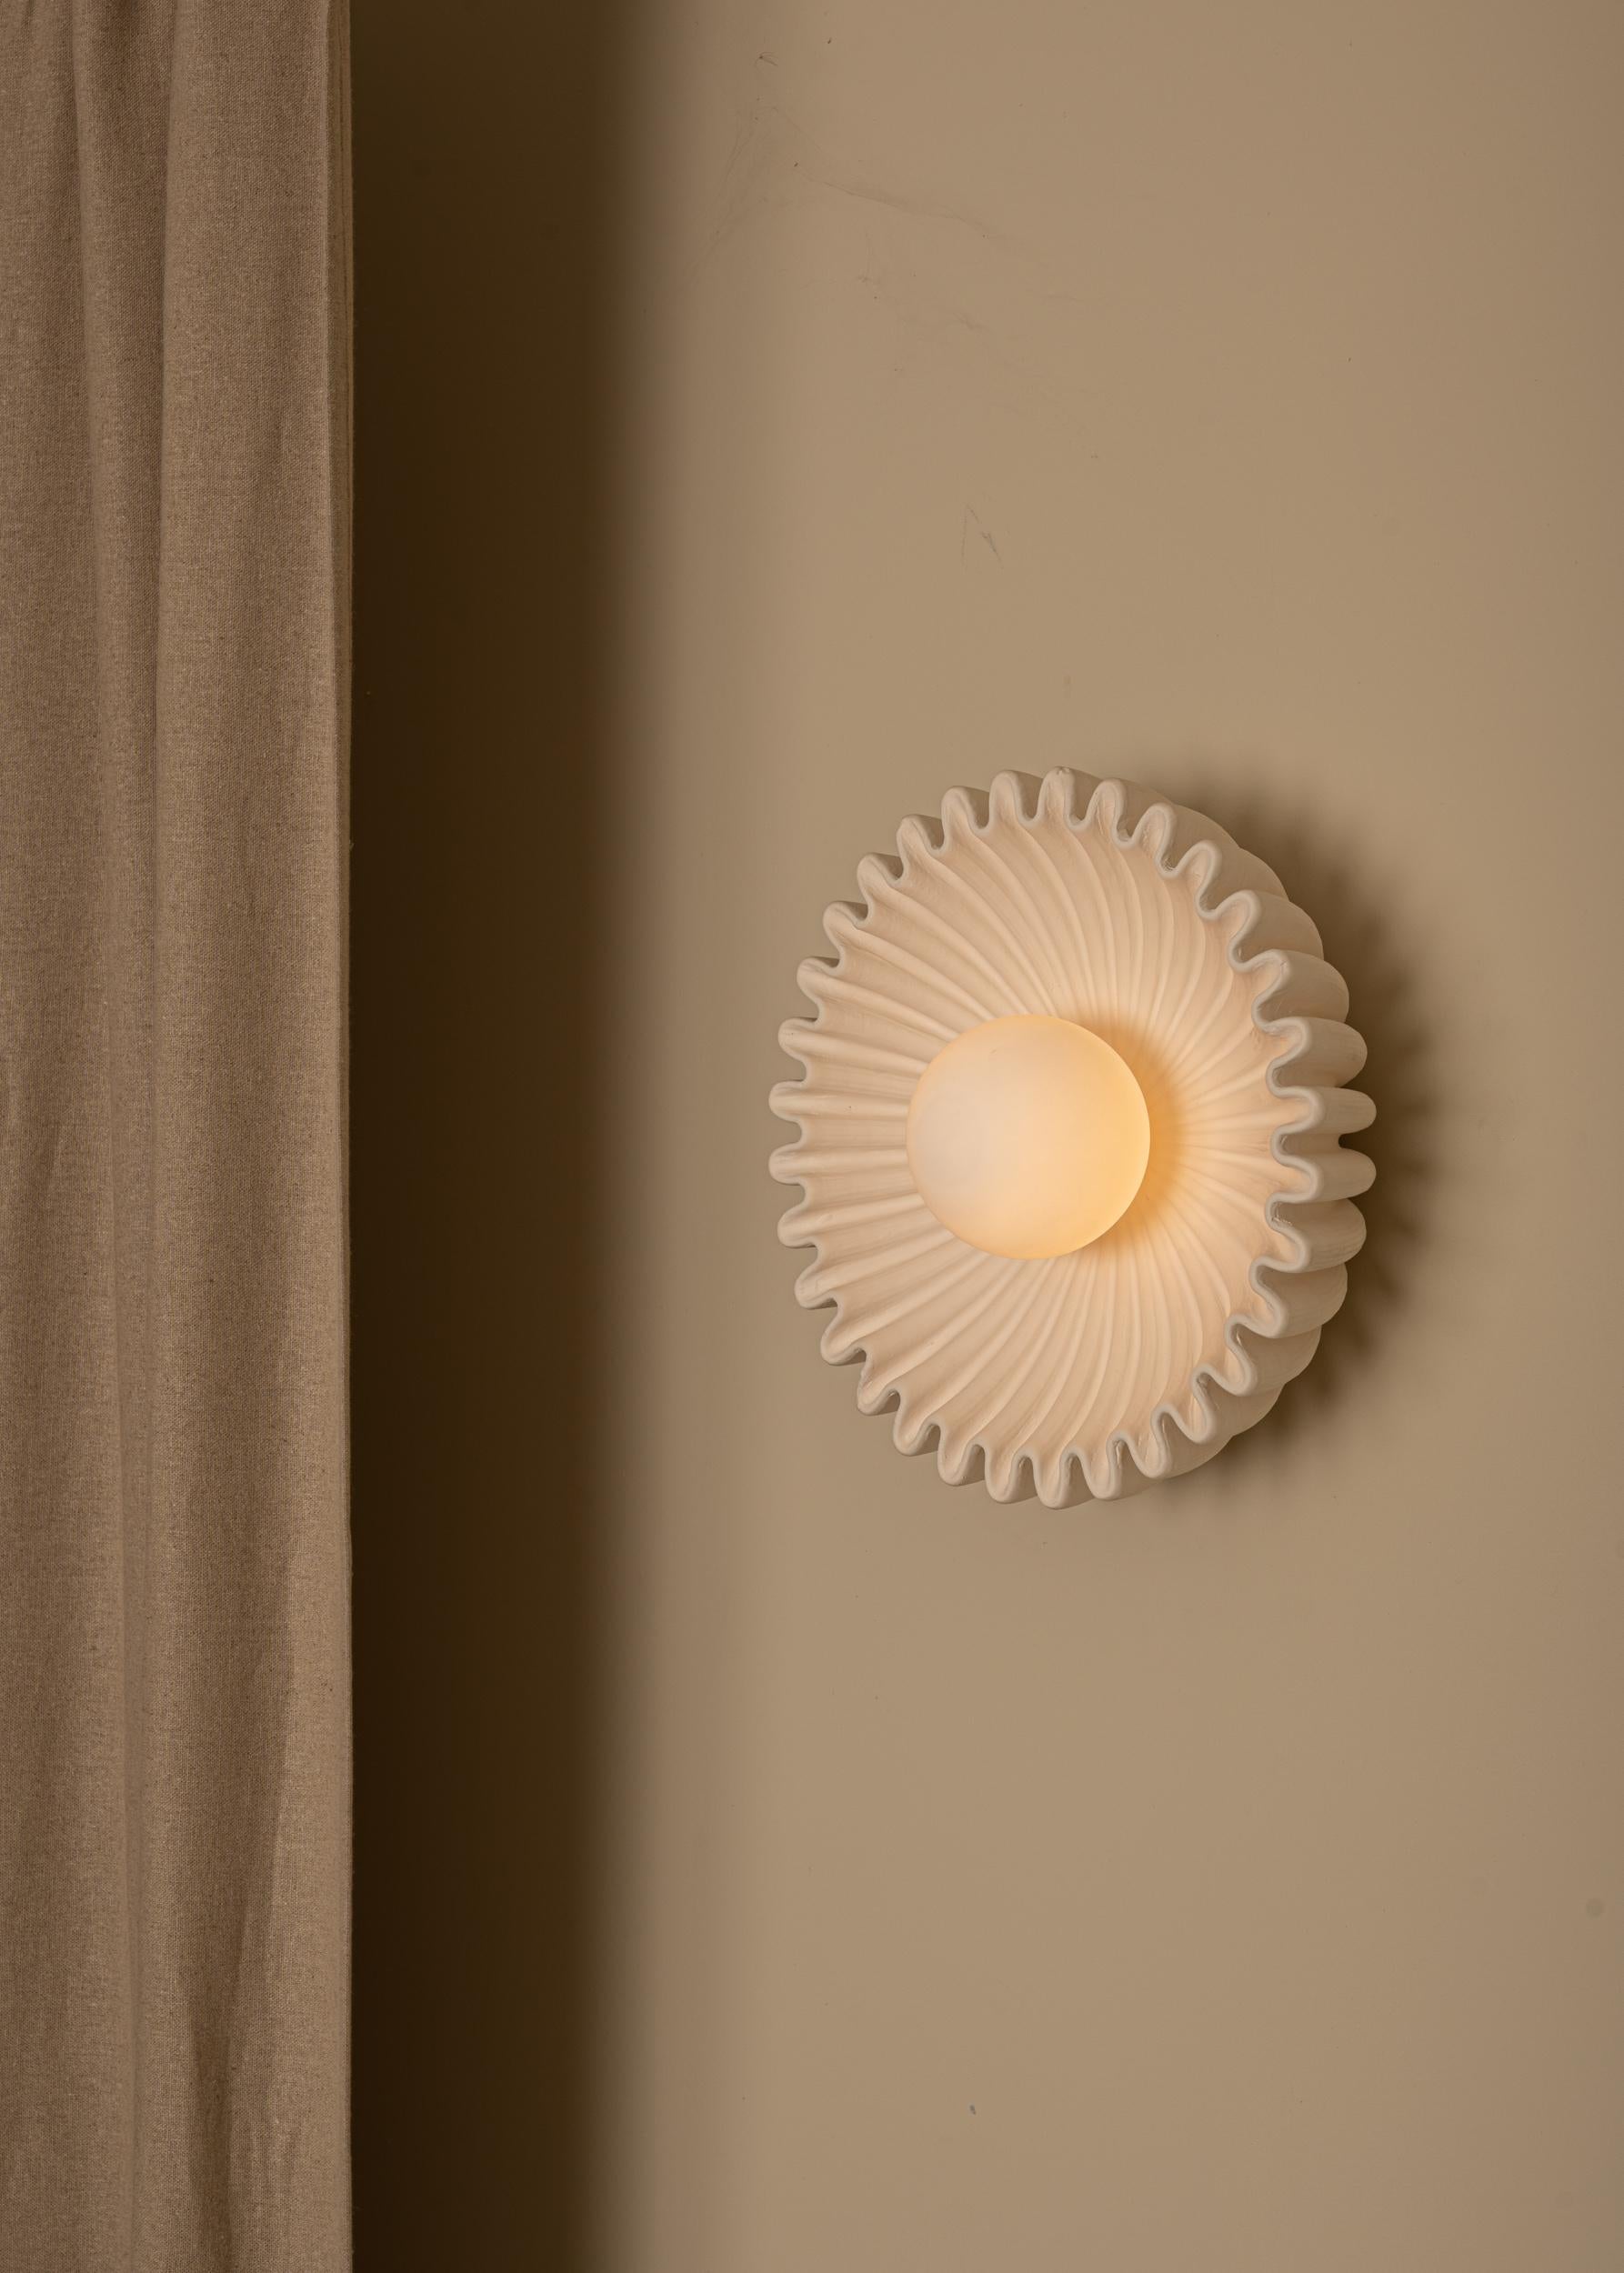 An outstanding piece made of a detailed ceramic shell, nesting a glass globe at its center, difusing a soft milky light. Both functional and sculptural, the Ostro wall light is unique and it is as beautiful alone or in pairs.